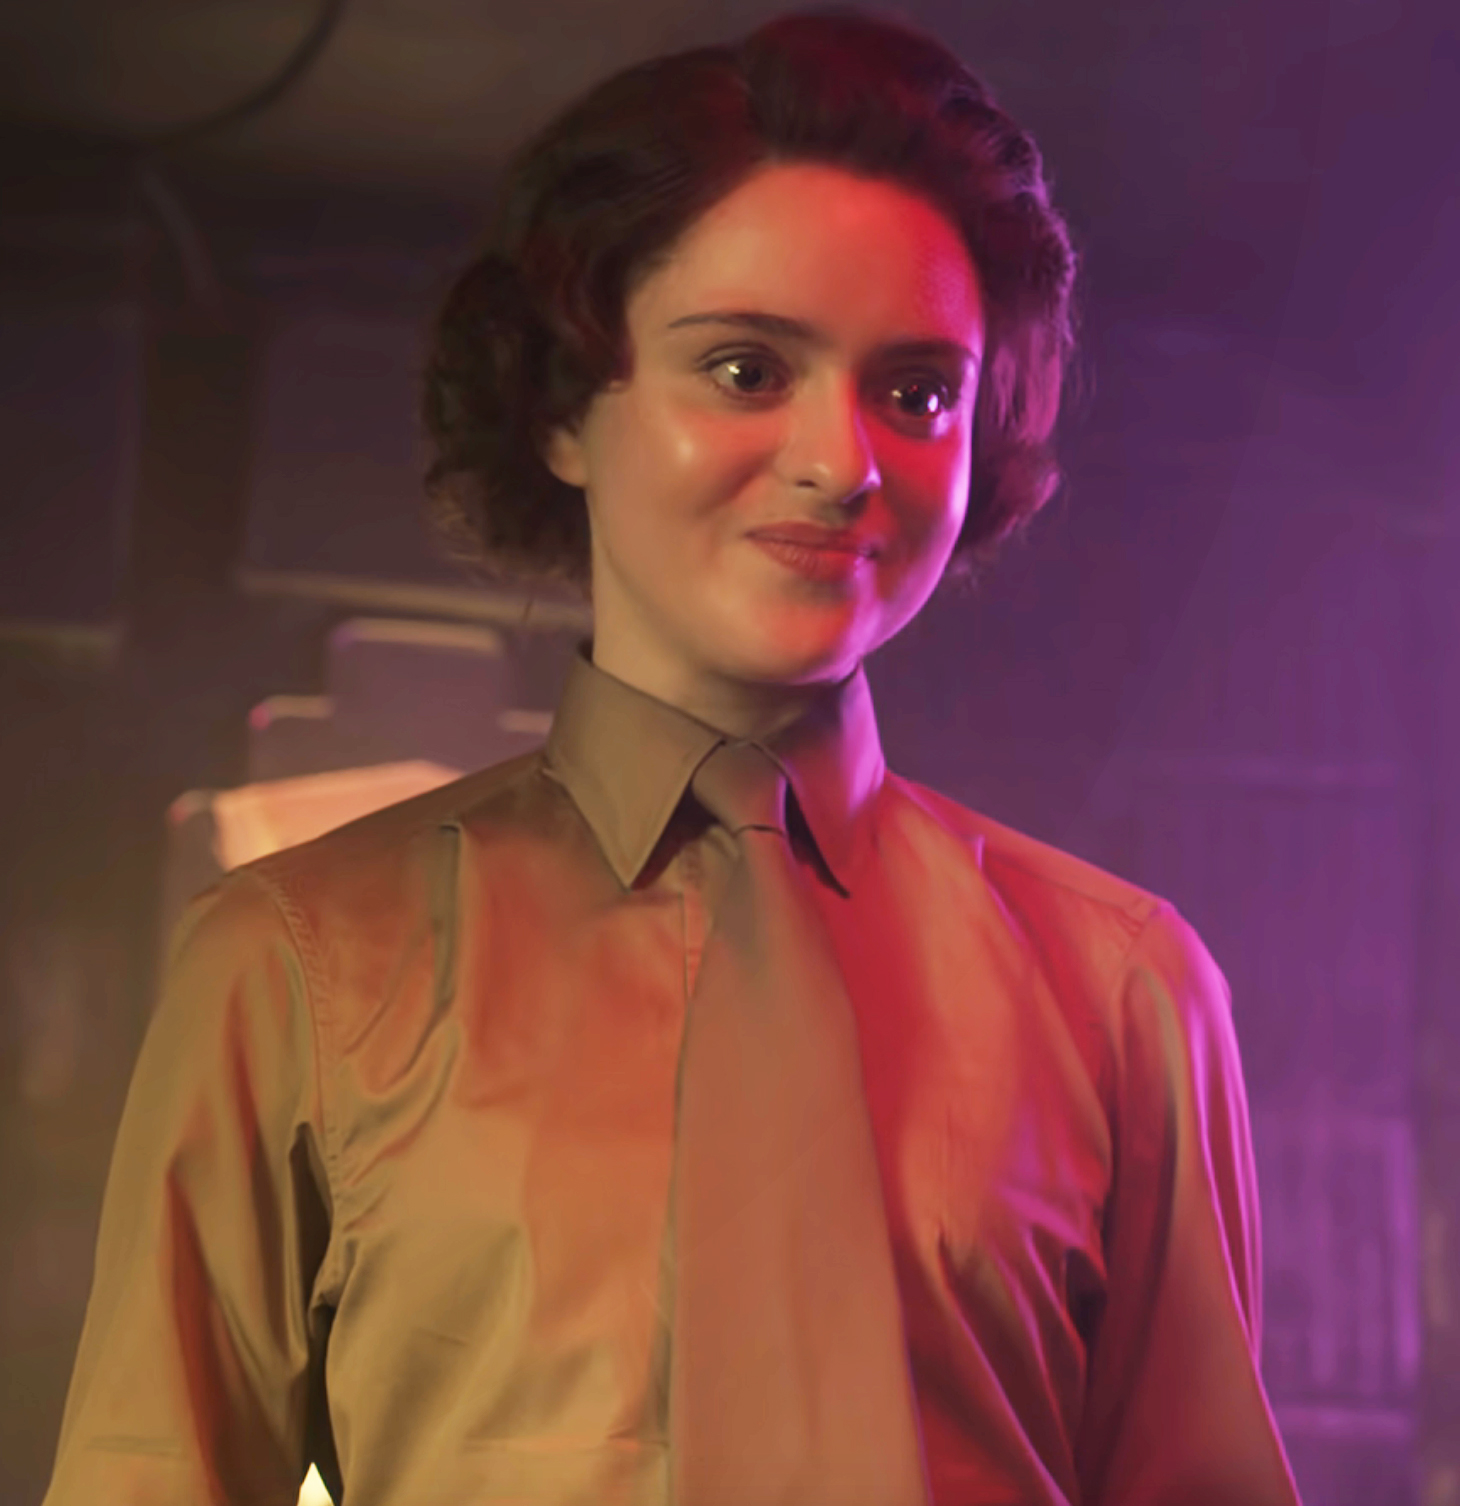 Close-up of Viola as Elizabeth smiling and wearing a blouse and tie